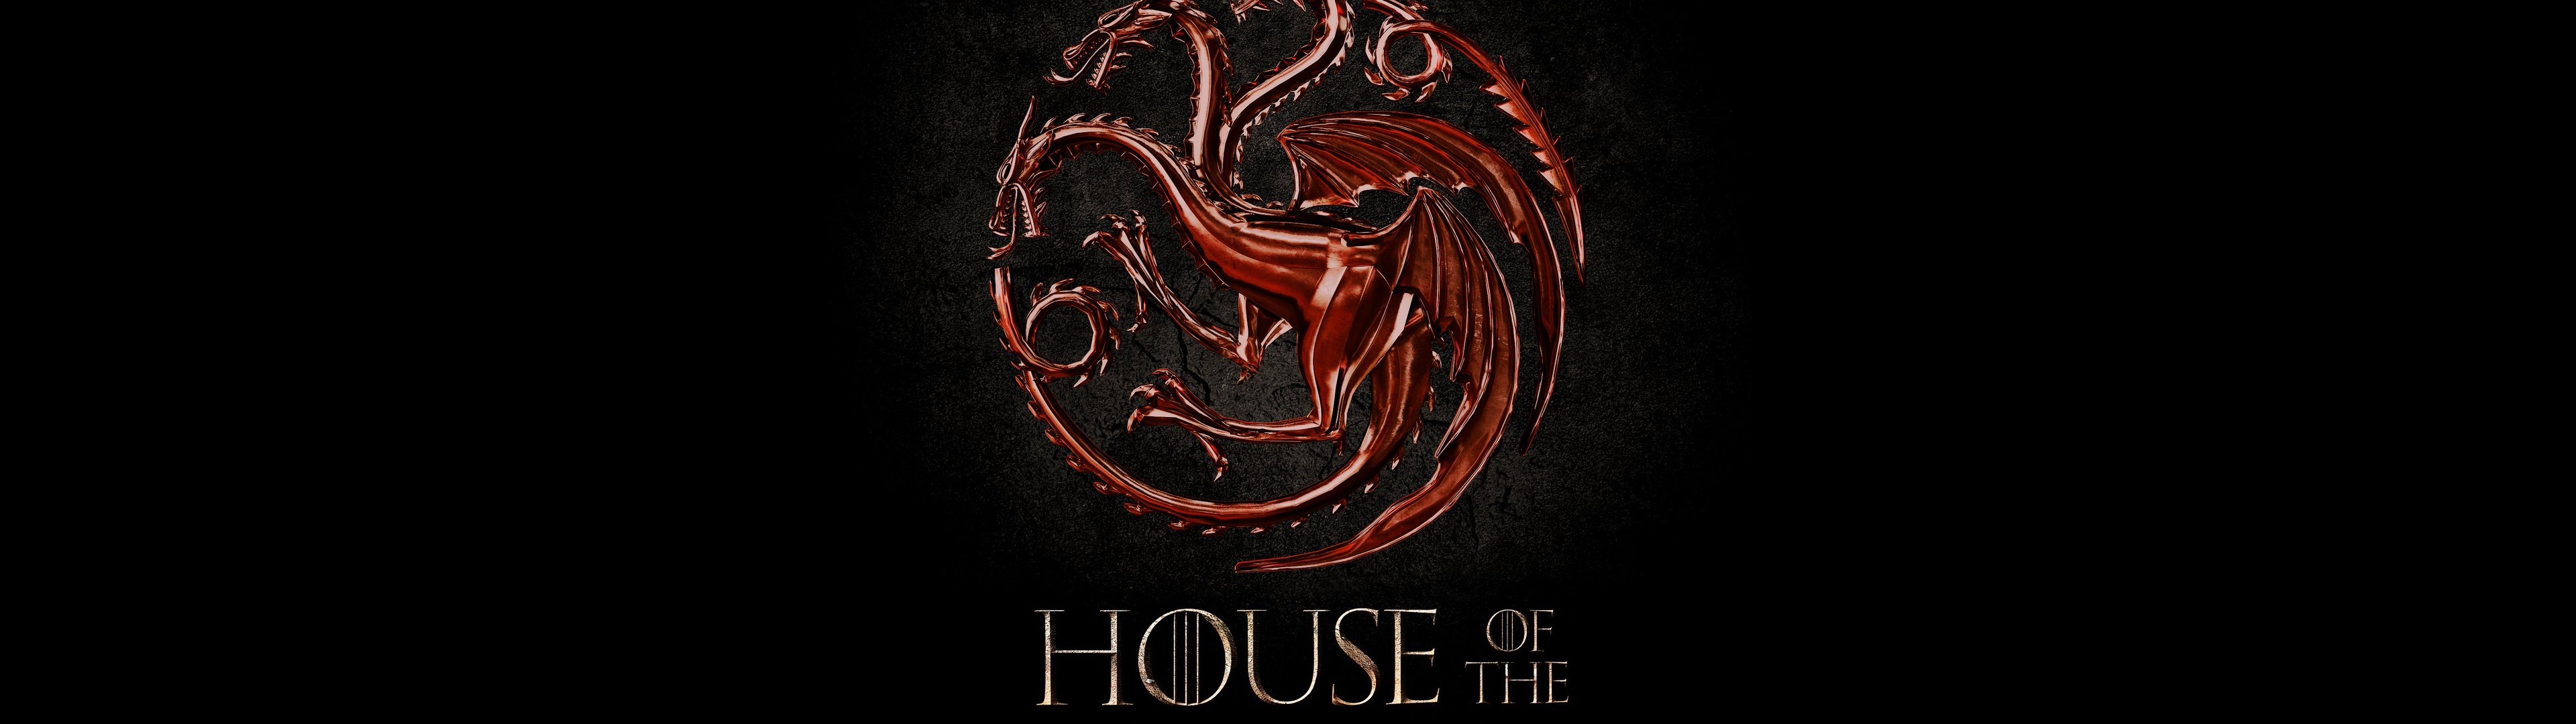 House of the Dragon Wallpapers on WallpaperDog